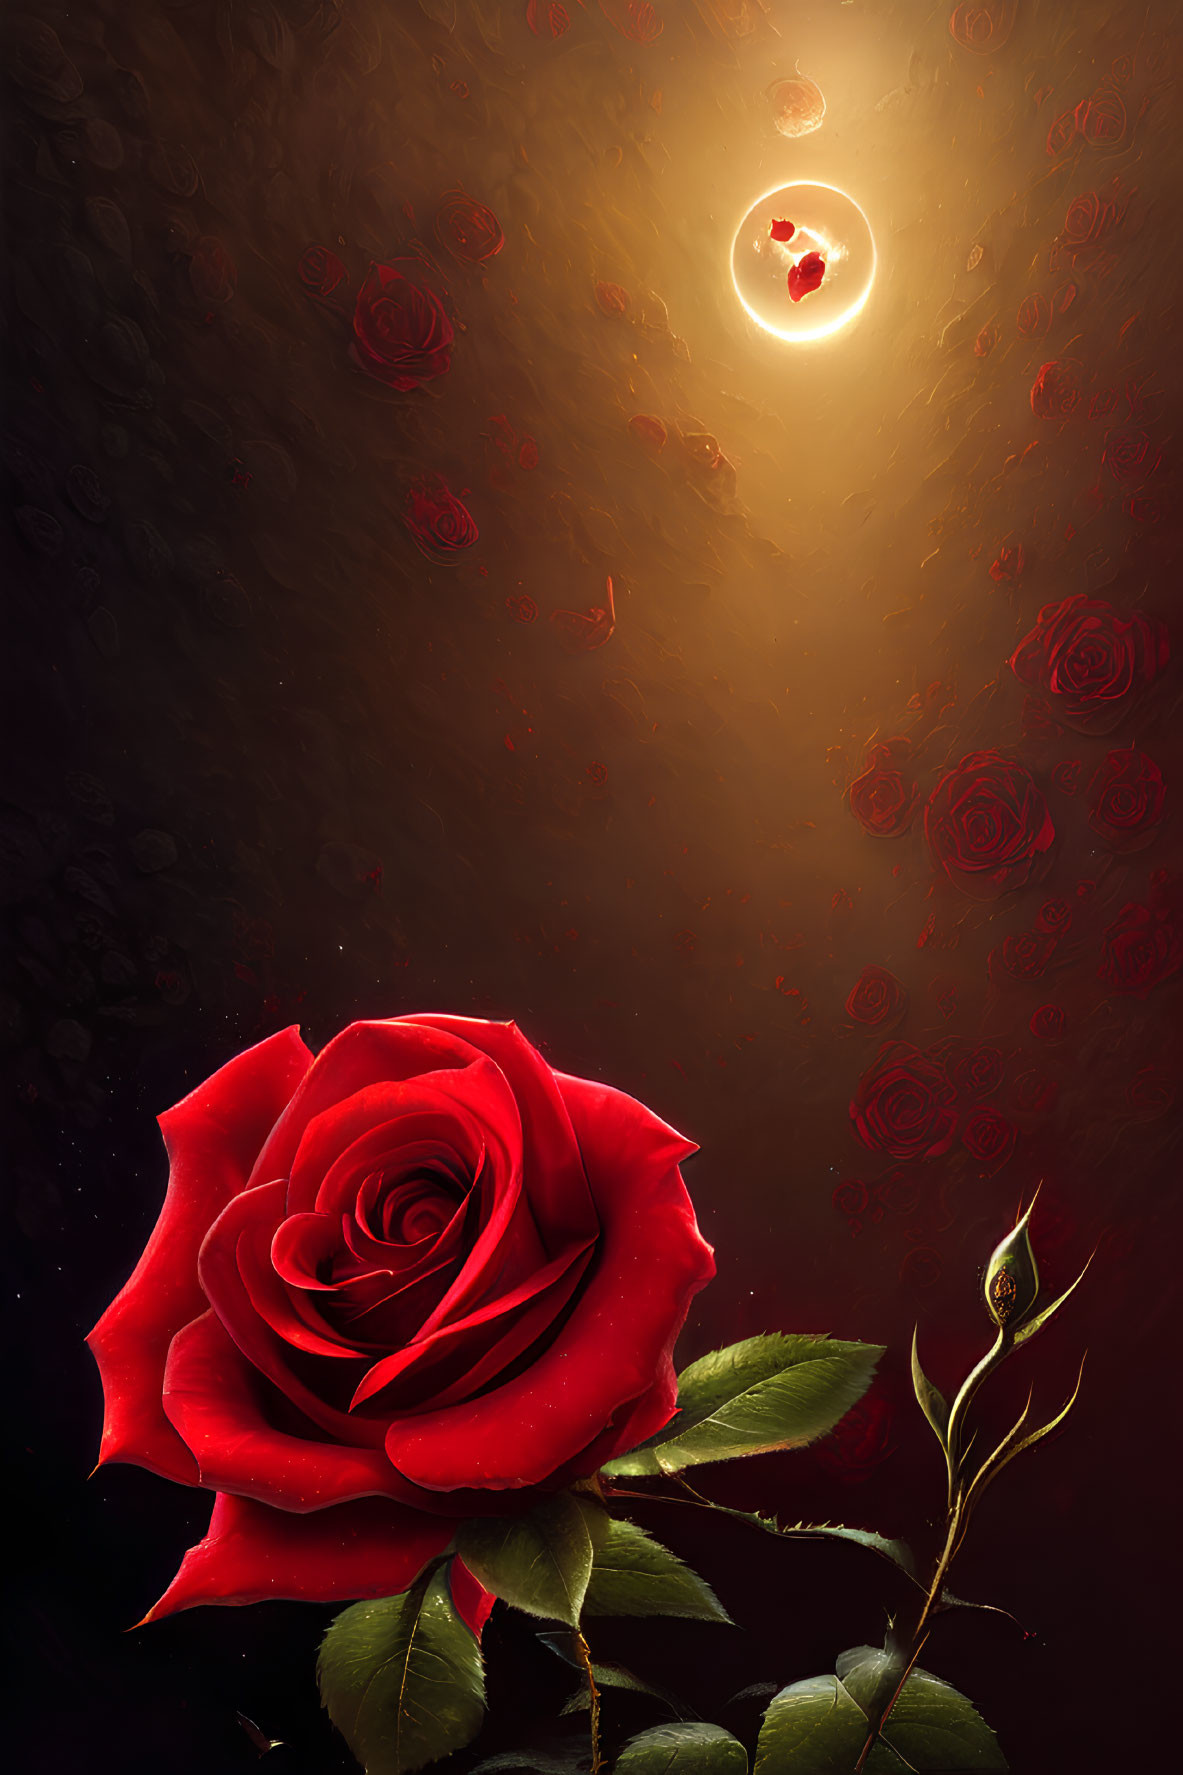 Detailed red rose bloom on dark backdrop with smaller silhouettes.